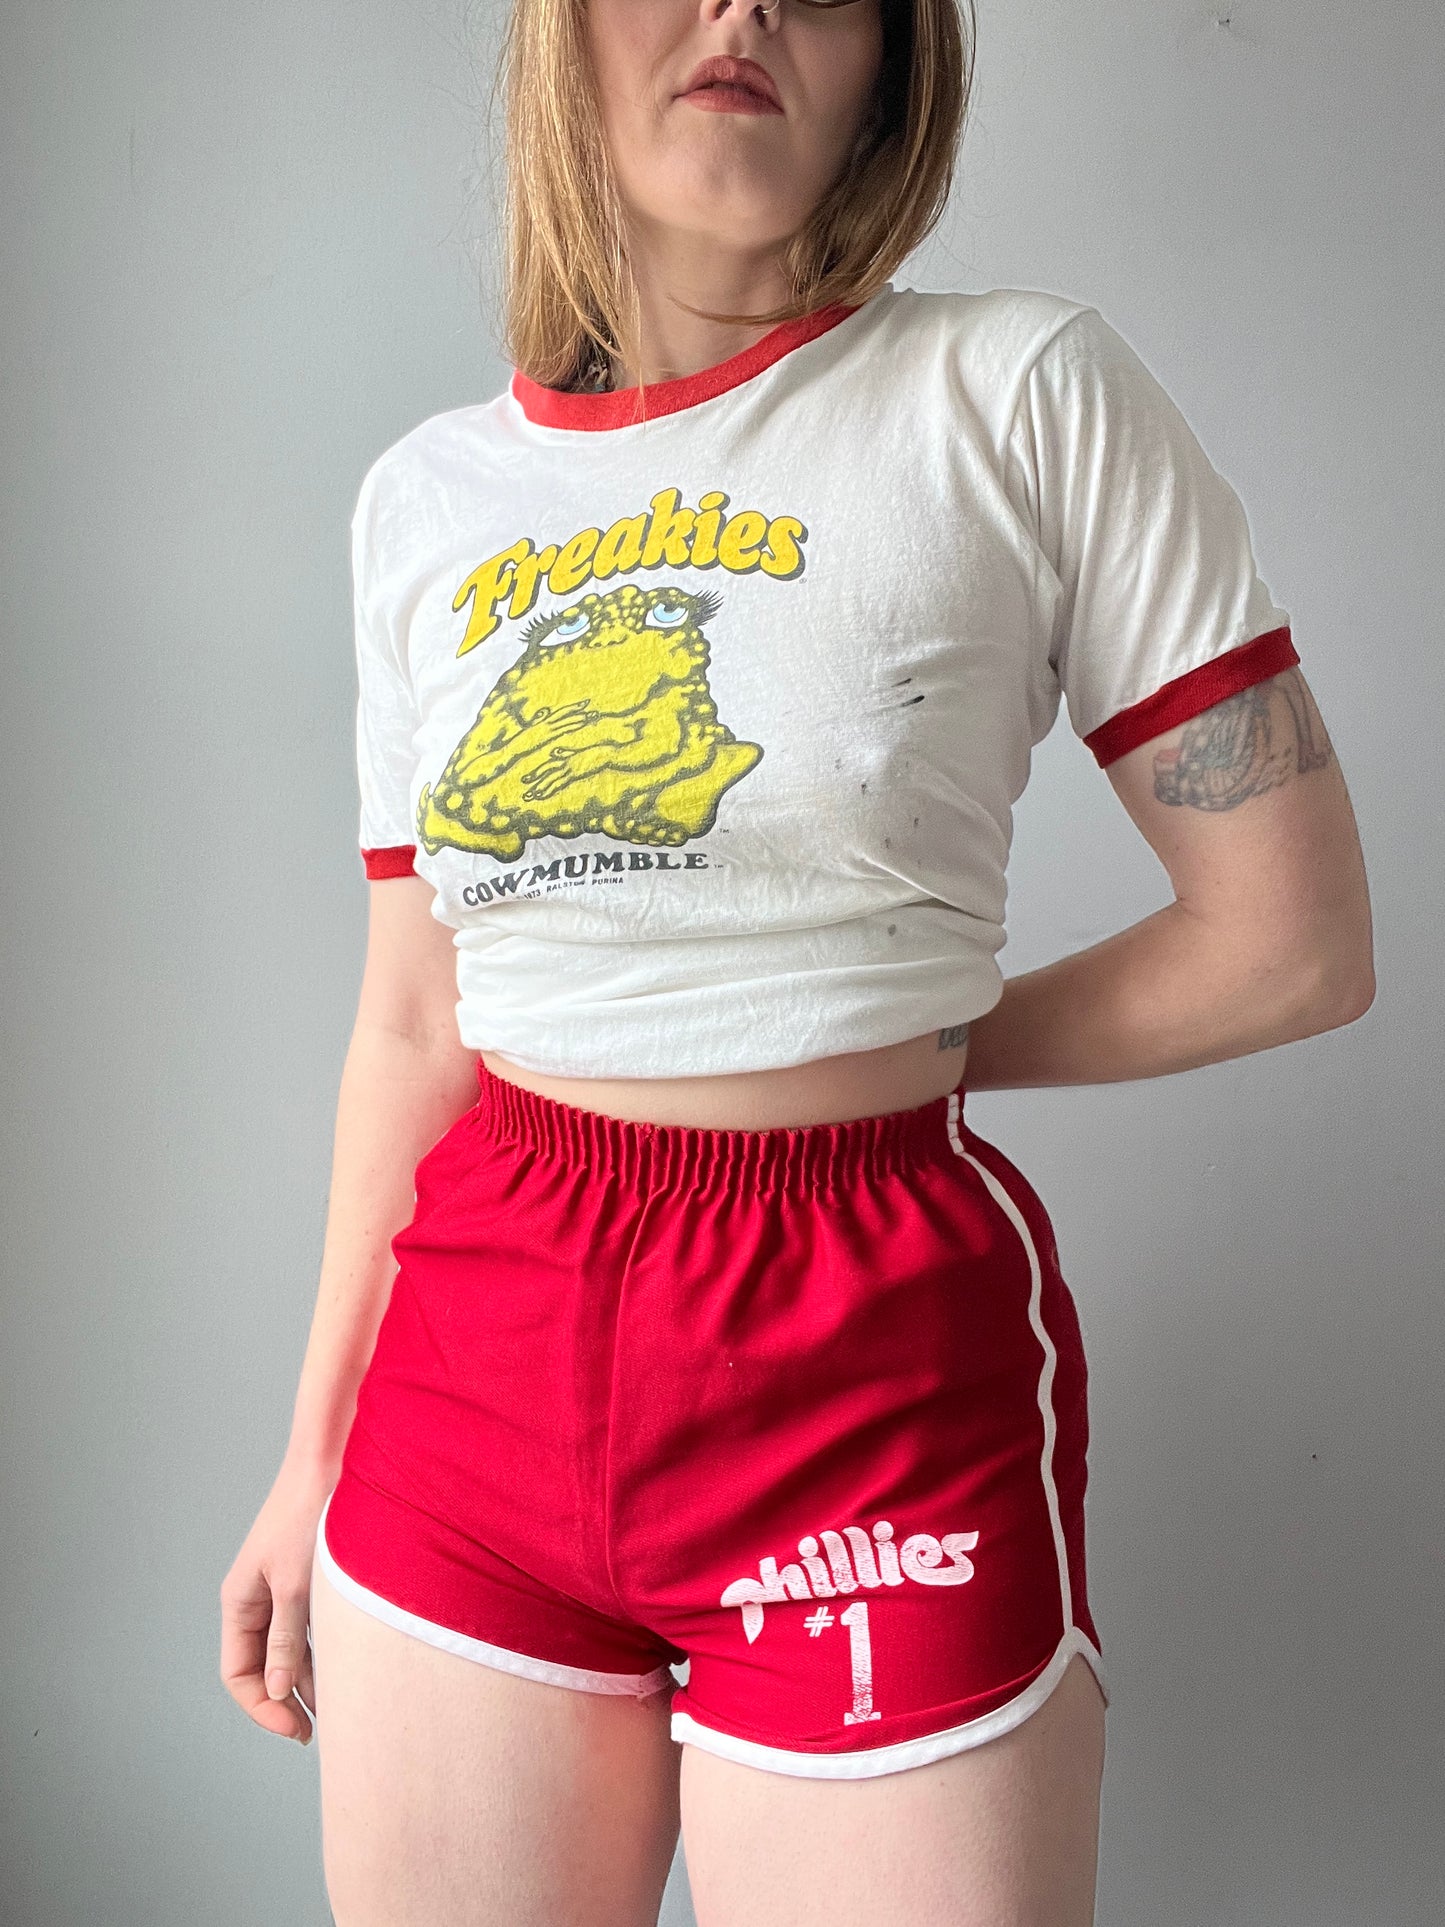 1970s Freakies Cowmumble Ralston Cereal Shirt